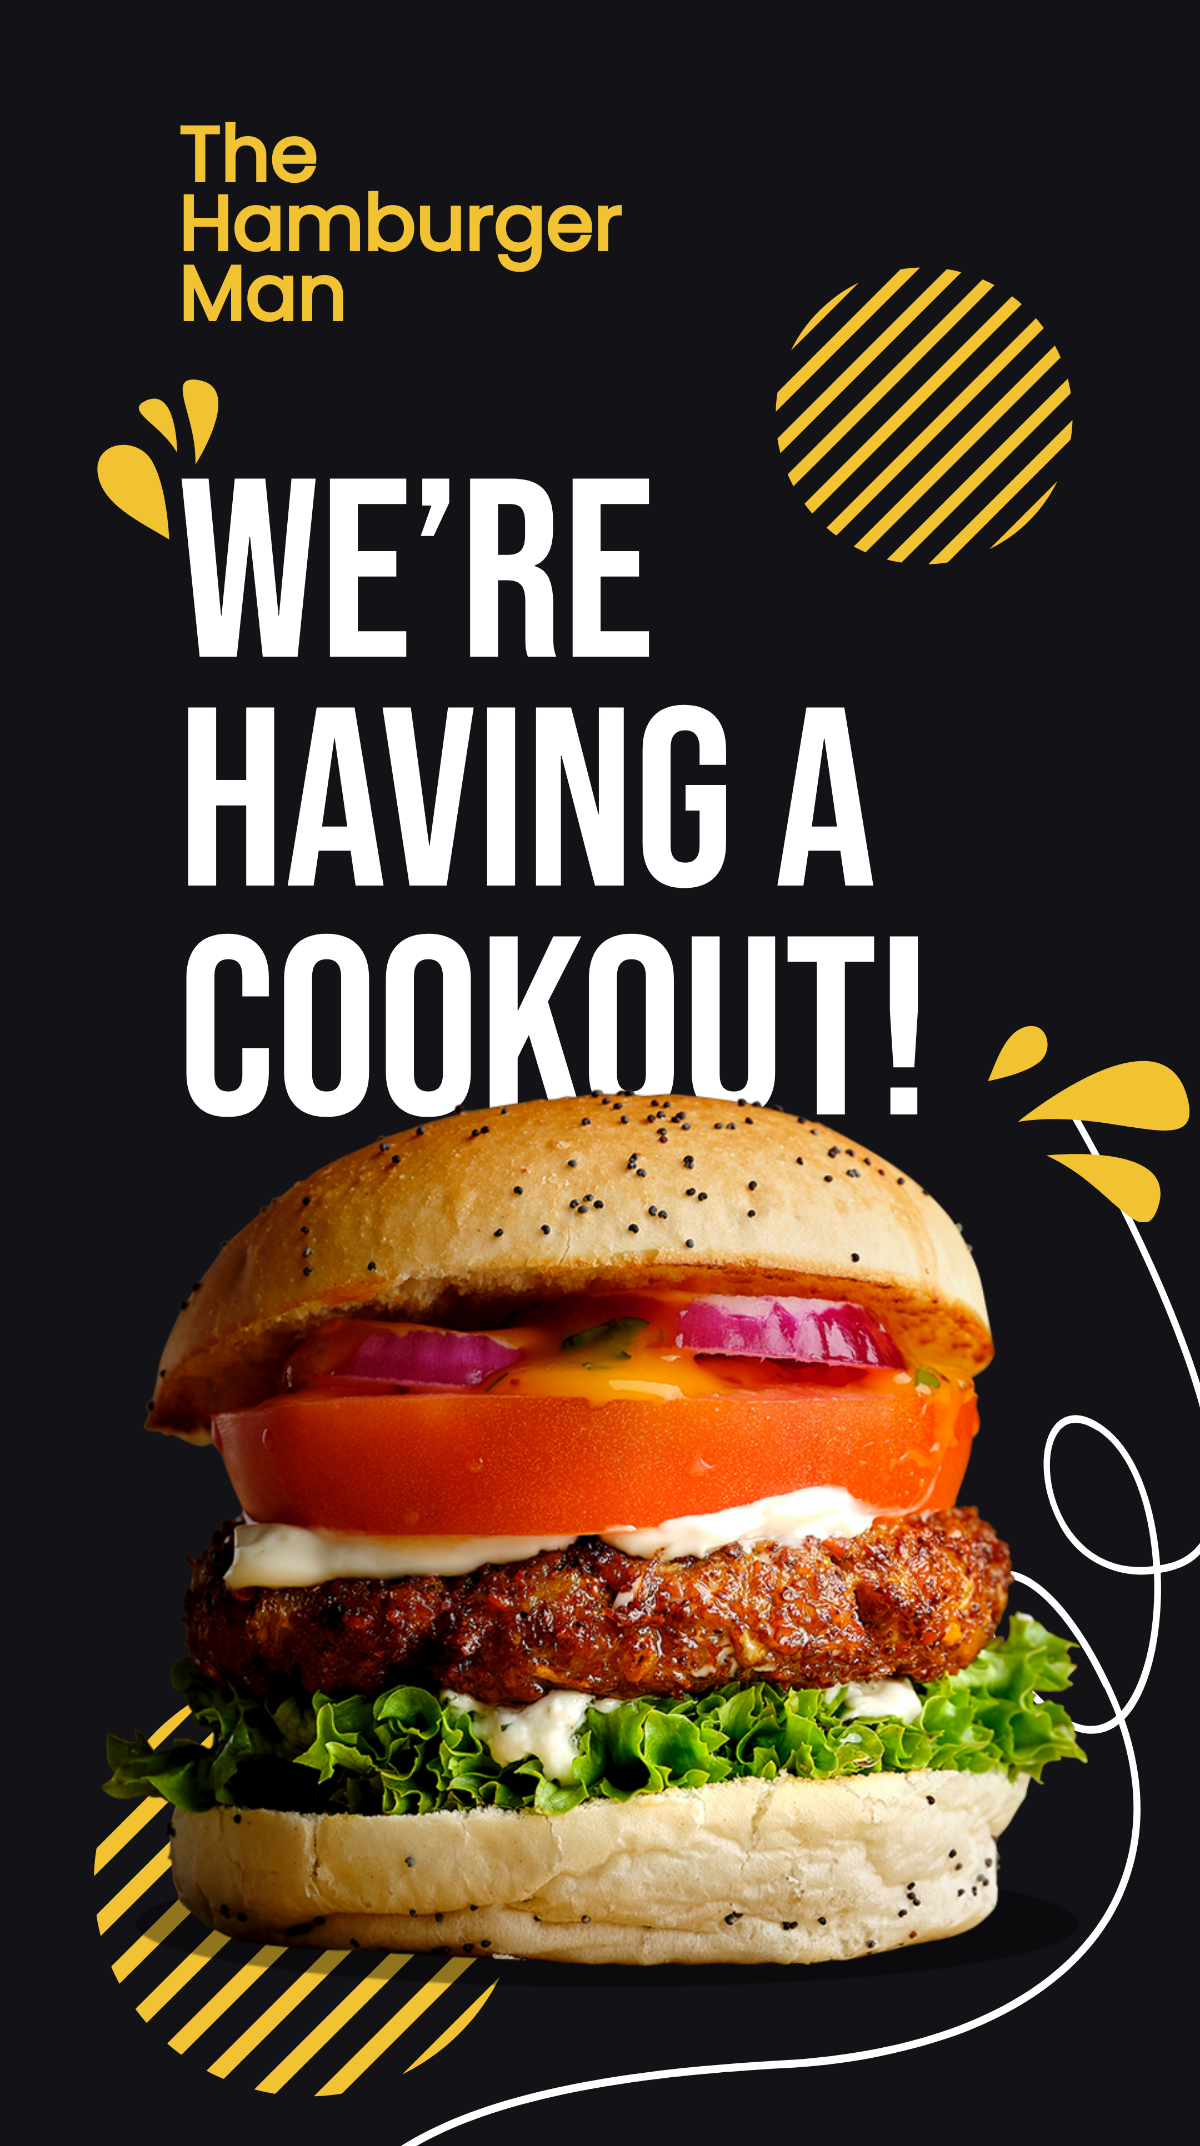 Cookout Invitation Whatsapp Post Template